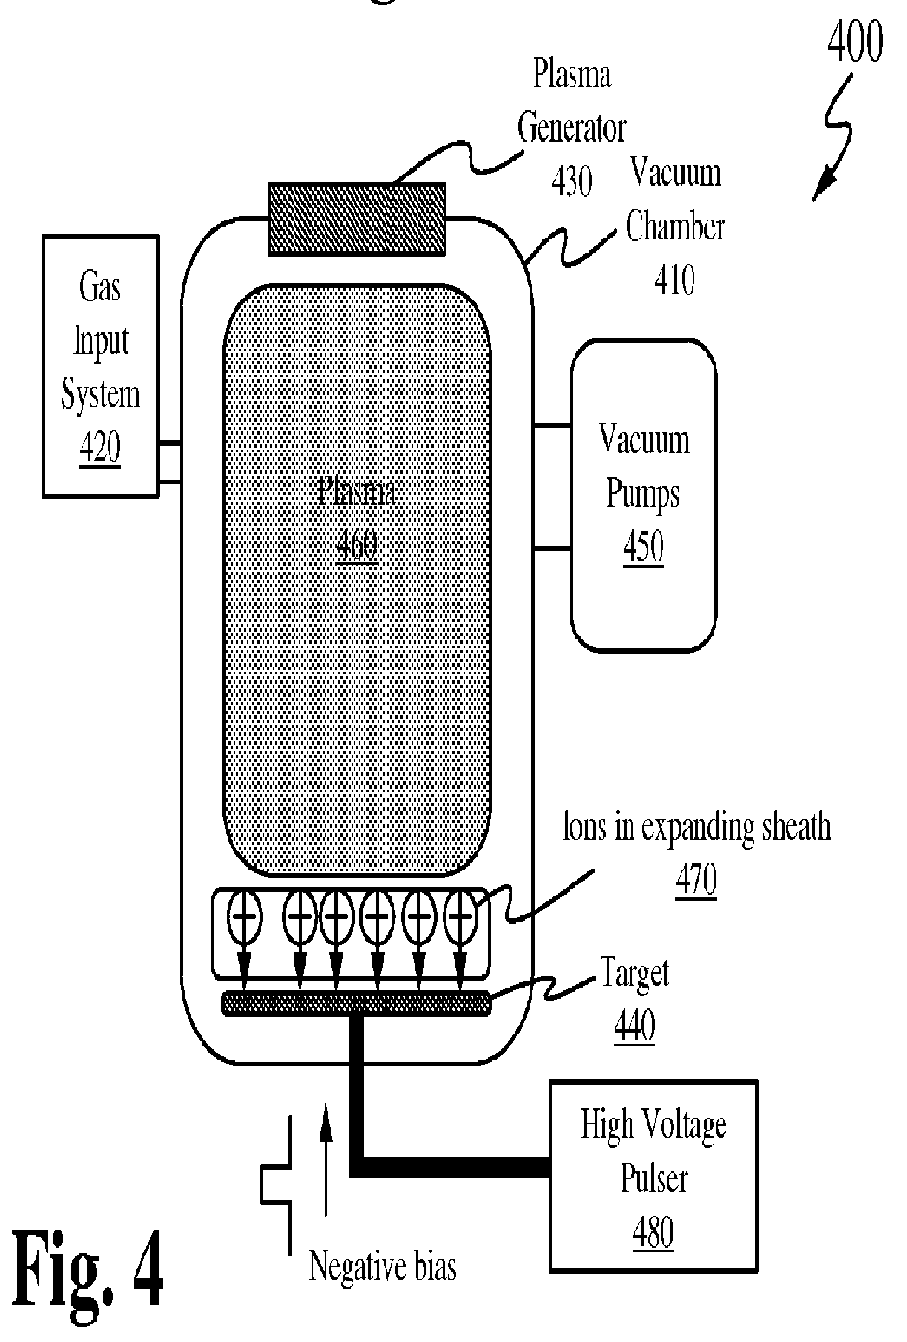 Ion implant system having grid assembly